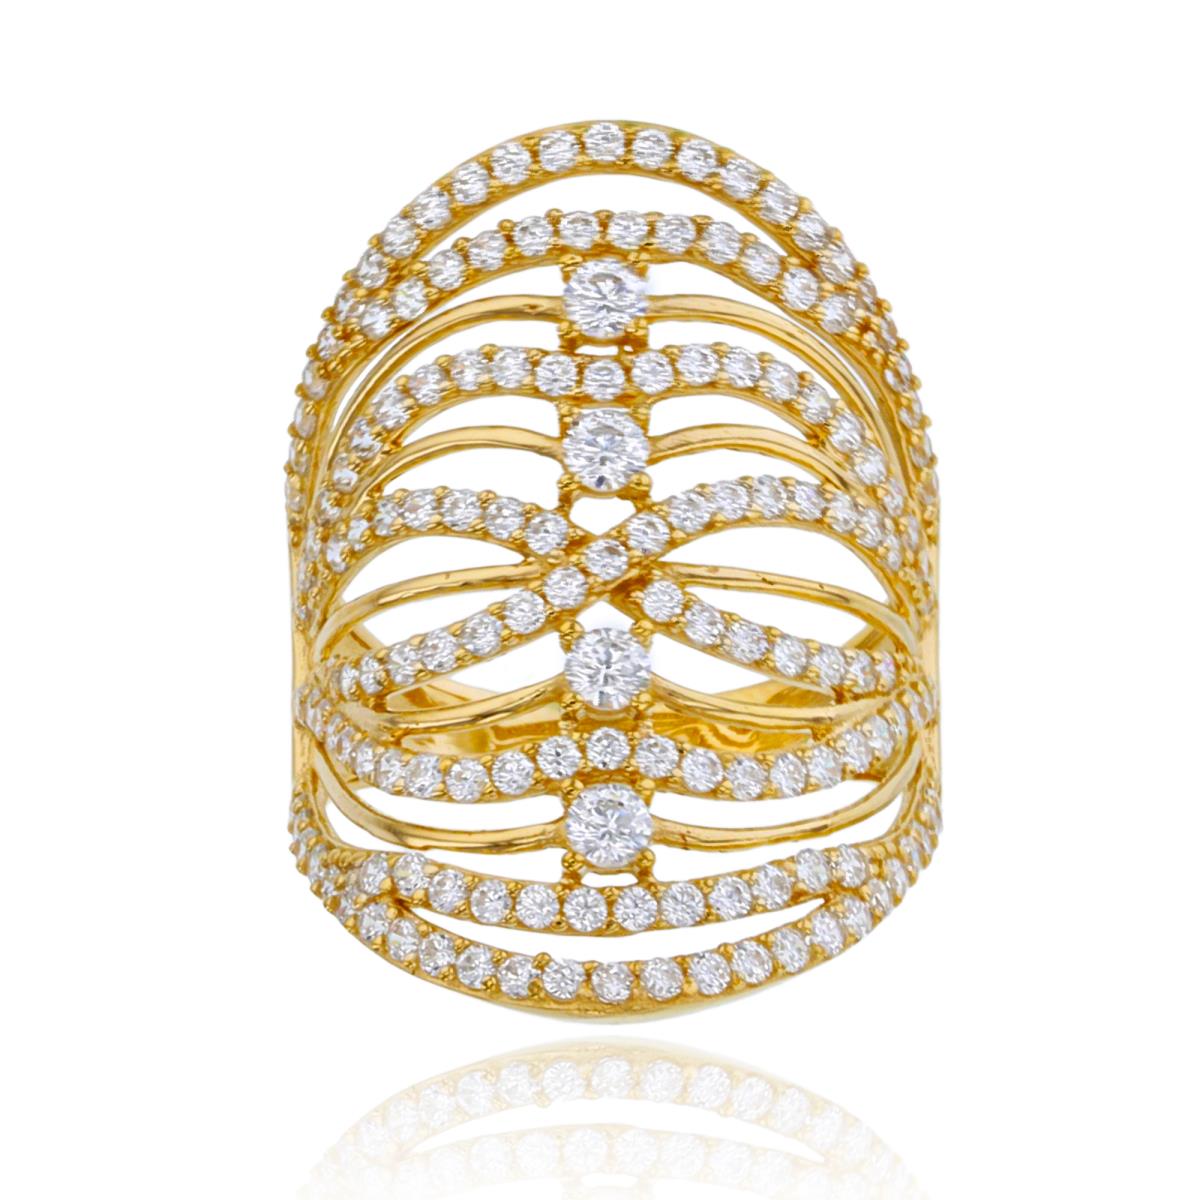 10K Yellow Gold Paved Multi Row 29mm Wide Fashion Ring